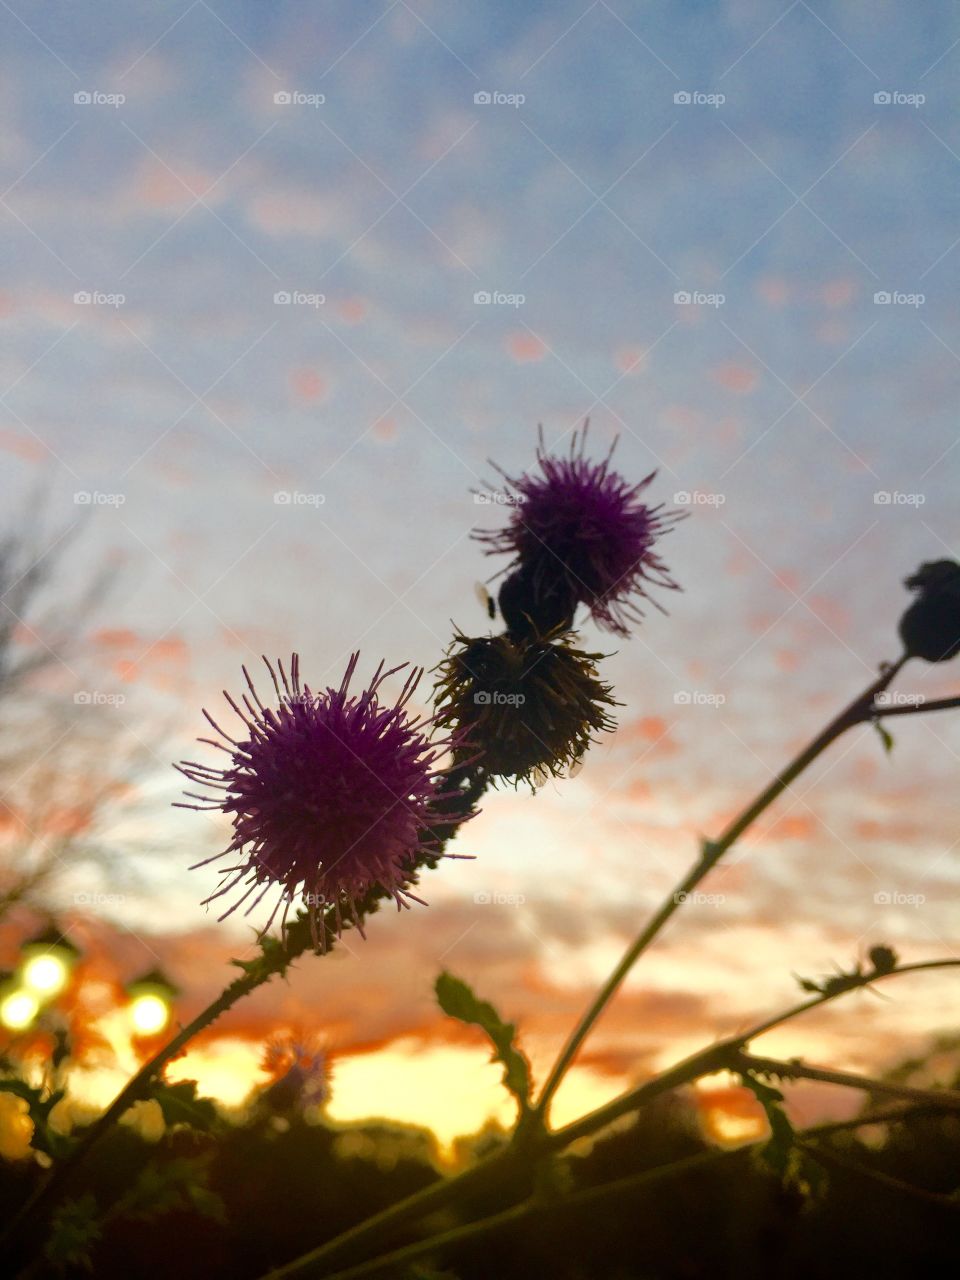 Flowers at sunset. Flowers at dusk